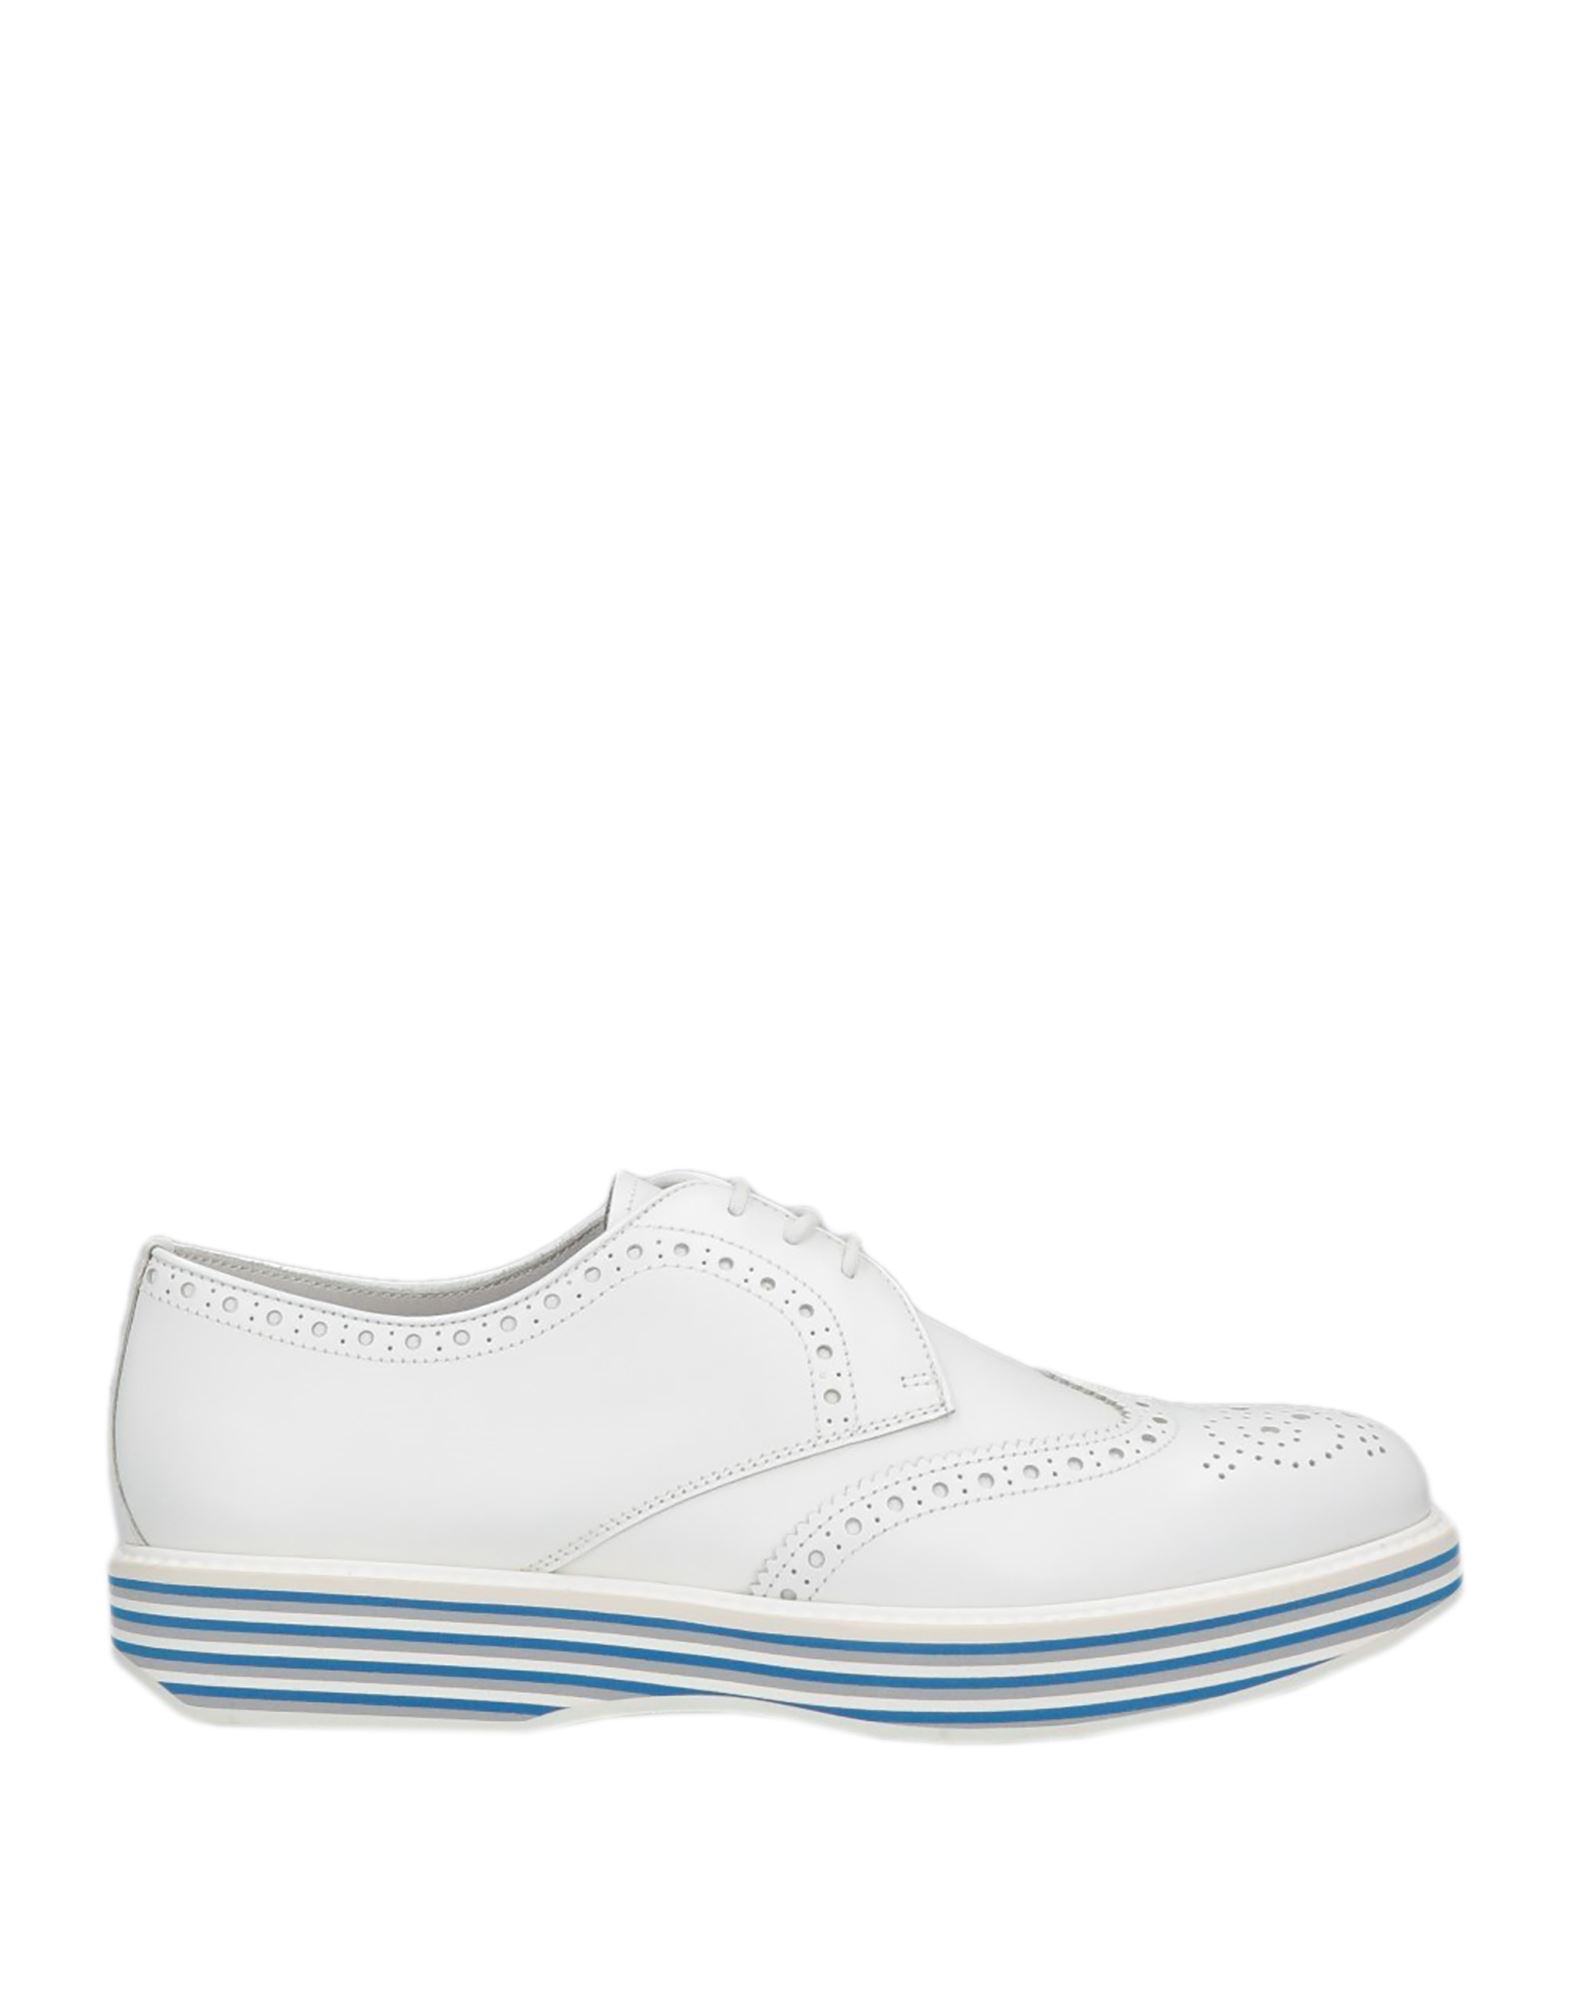 Church's Woman Lace-up Shoes White Size 10 Soft Leather